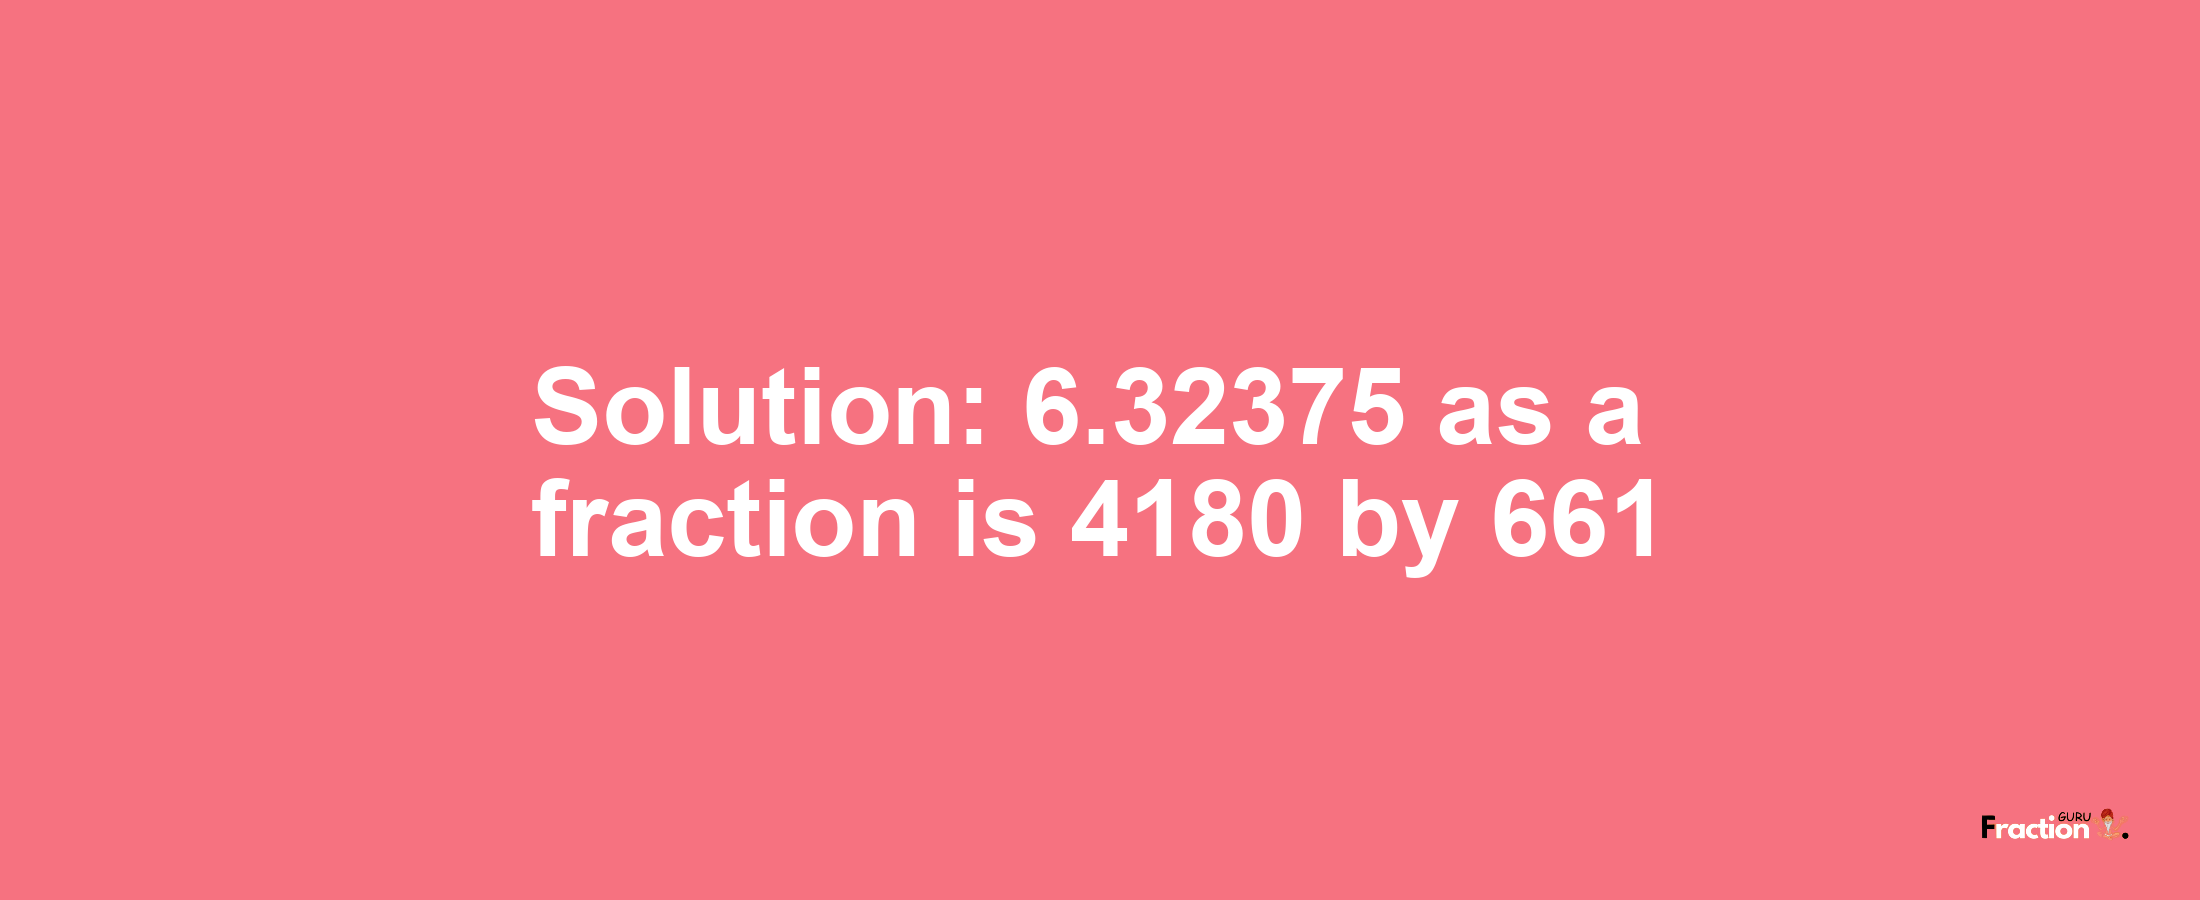 Solution:6.32375 as a fraction is 4180/661